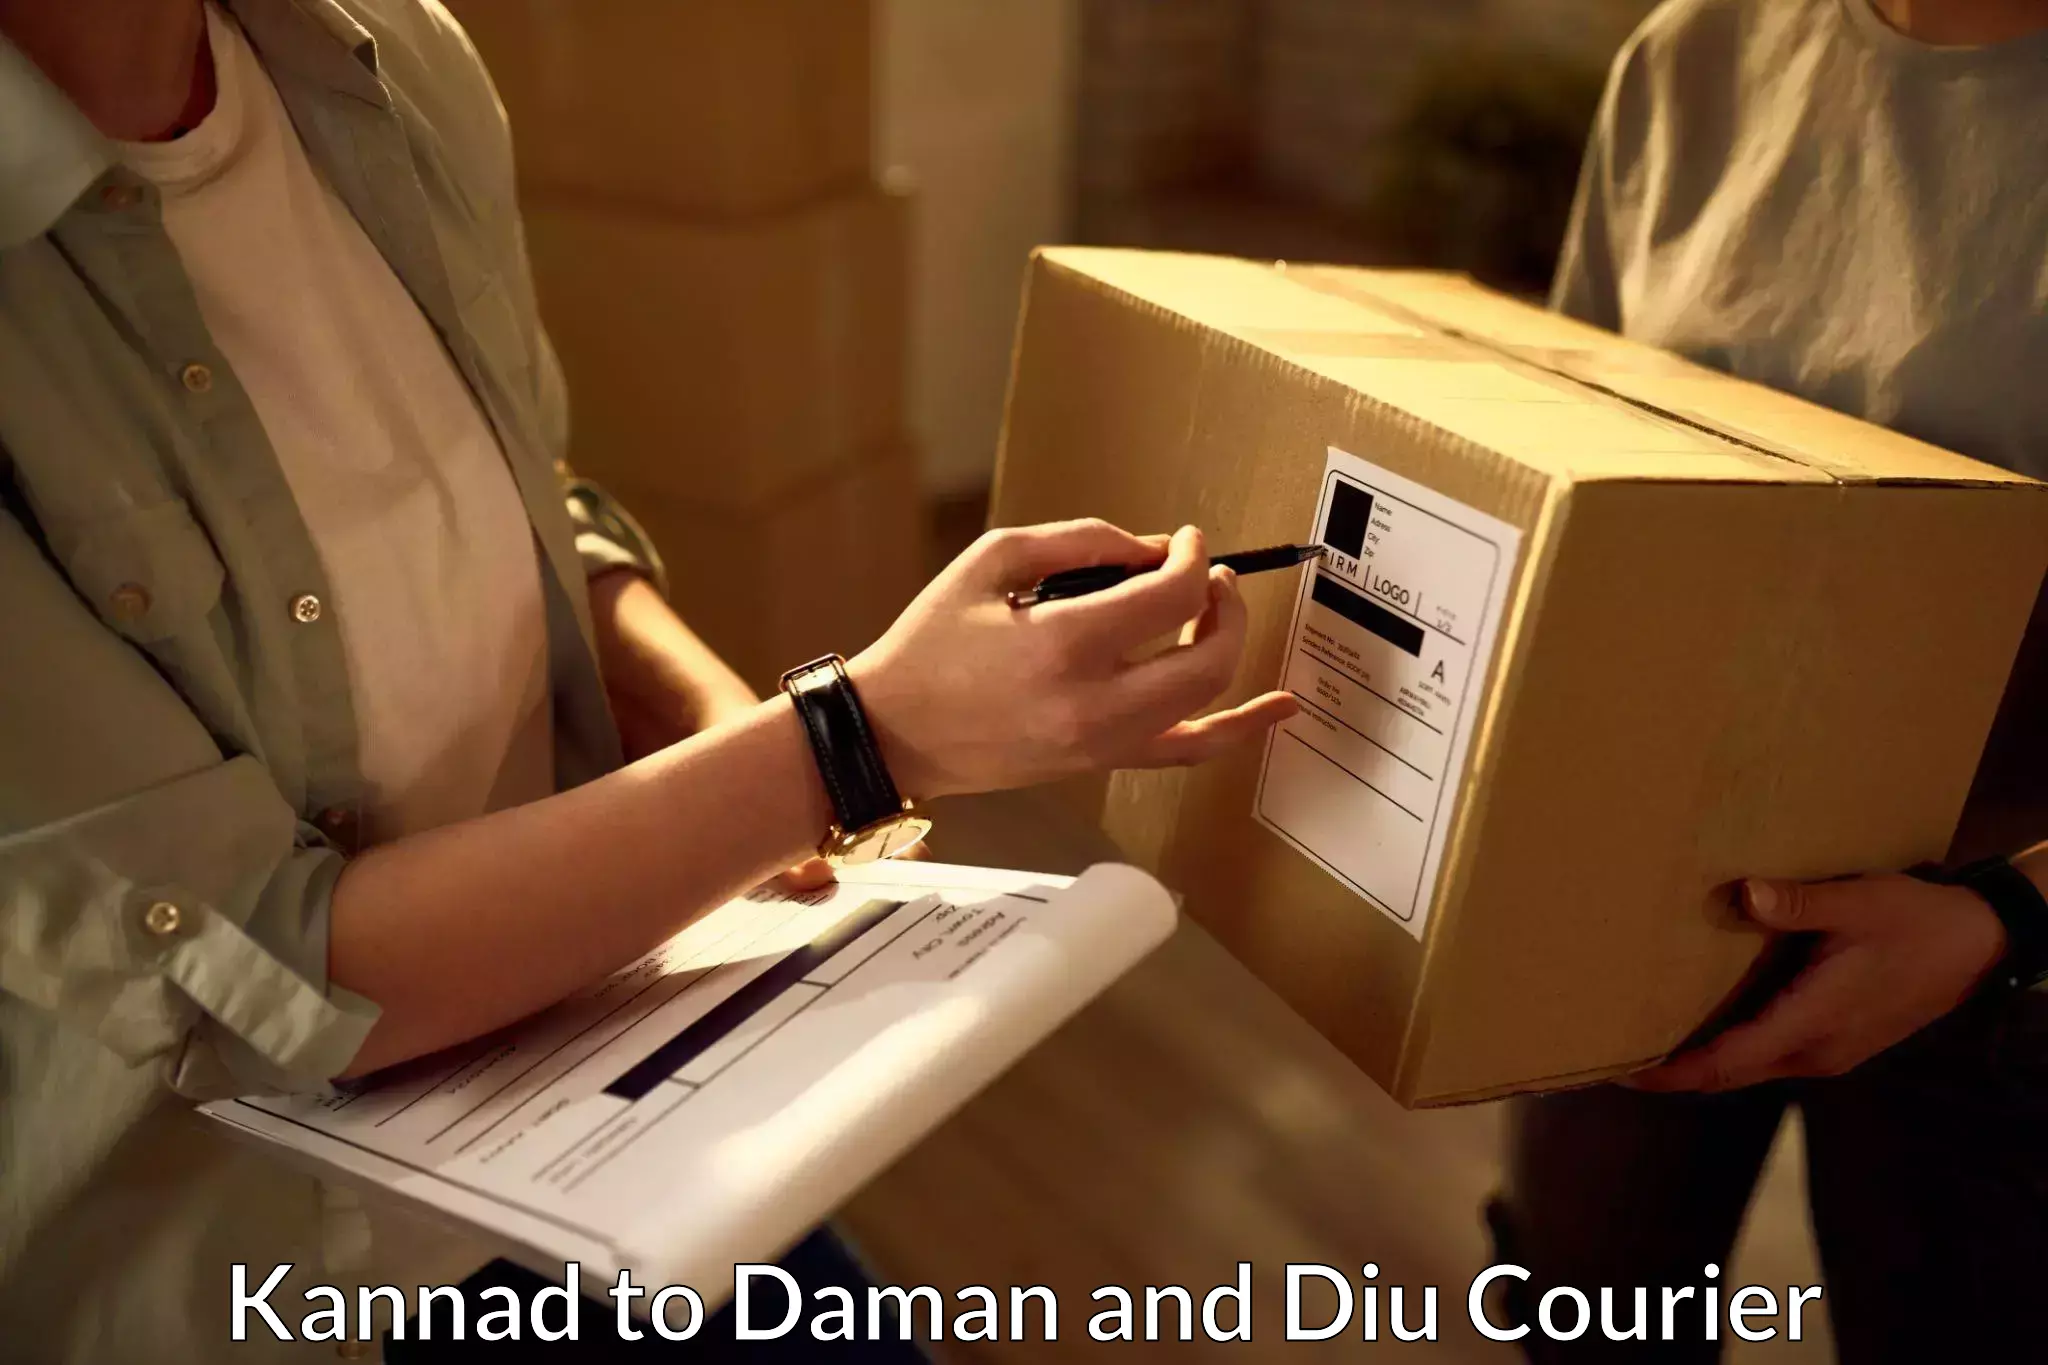 High-speed parcel service Kannad to Daman and Diu